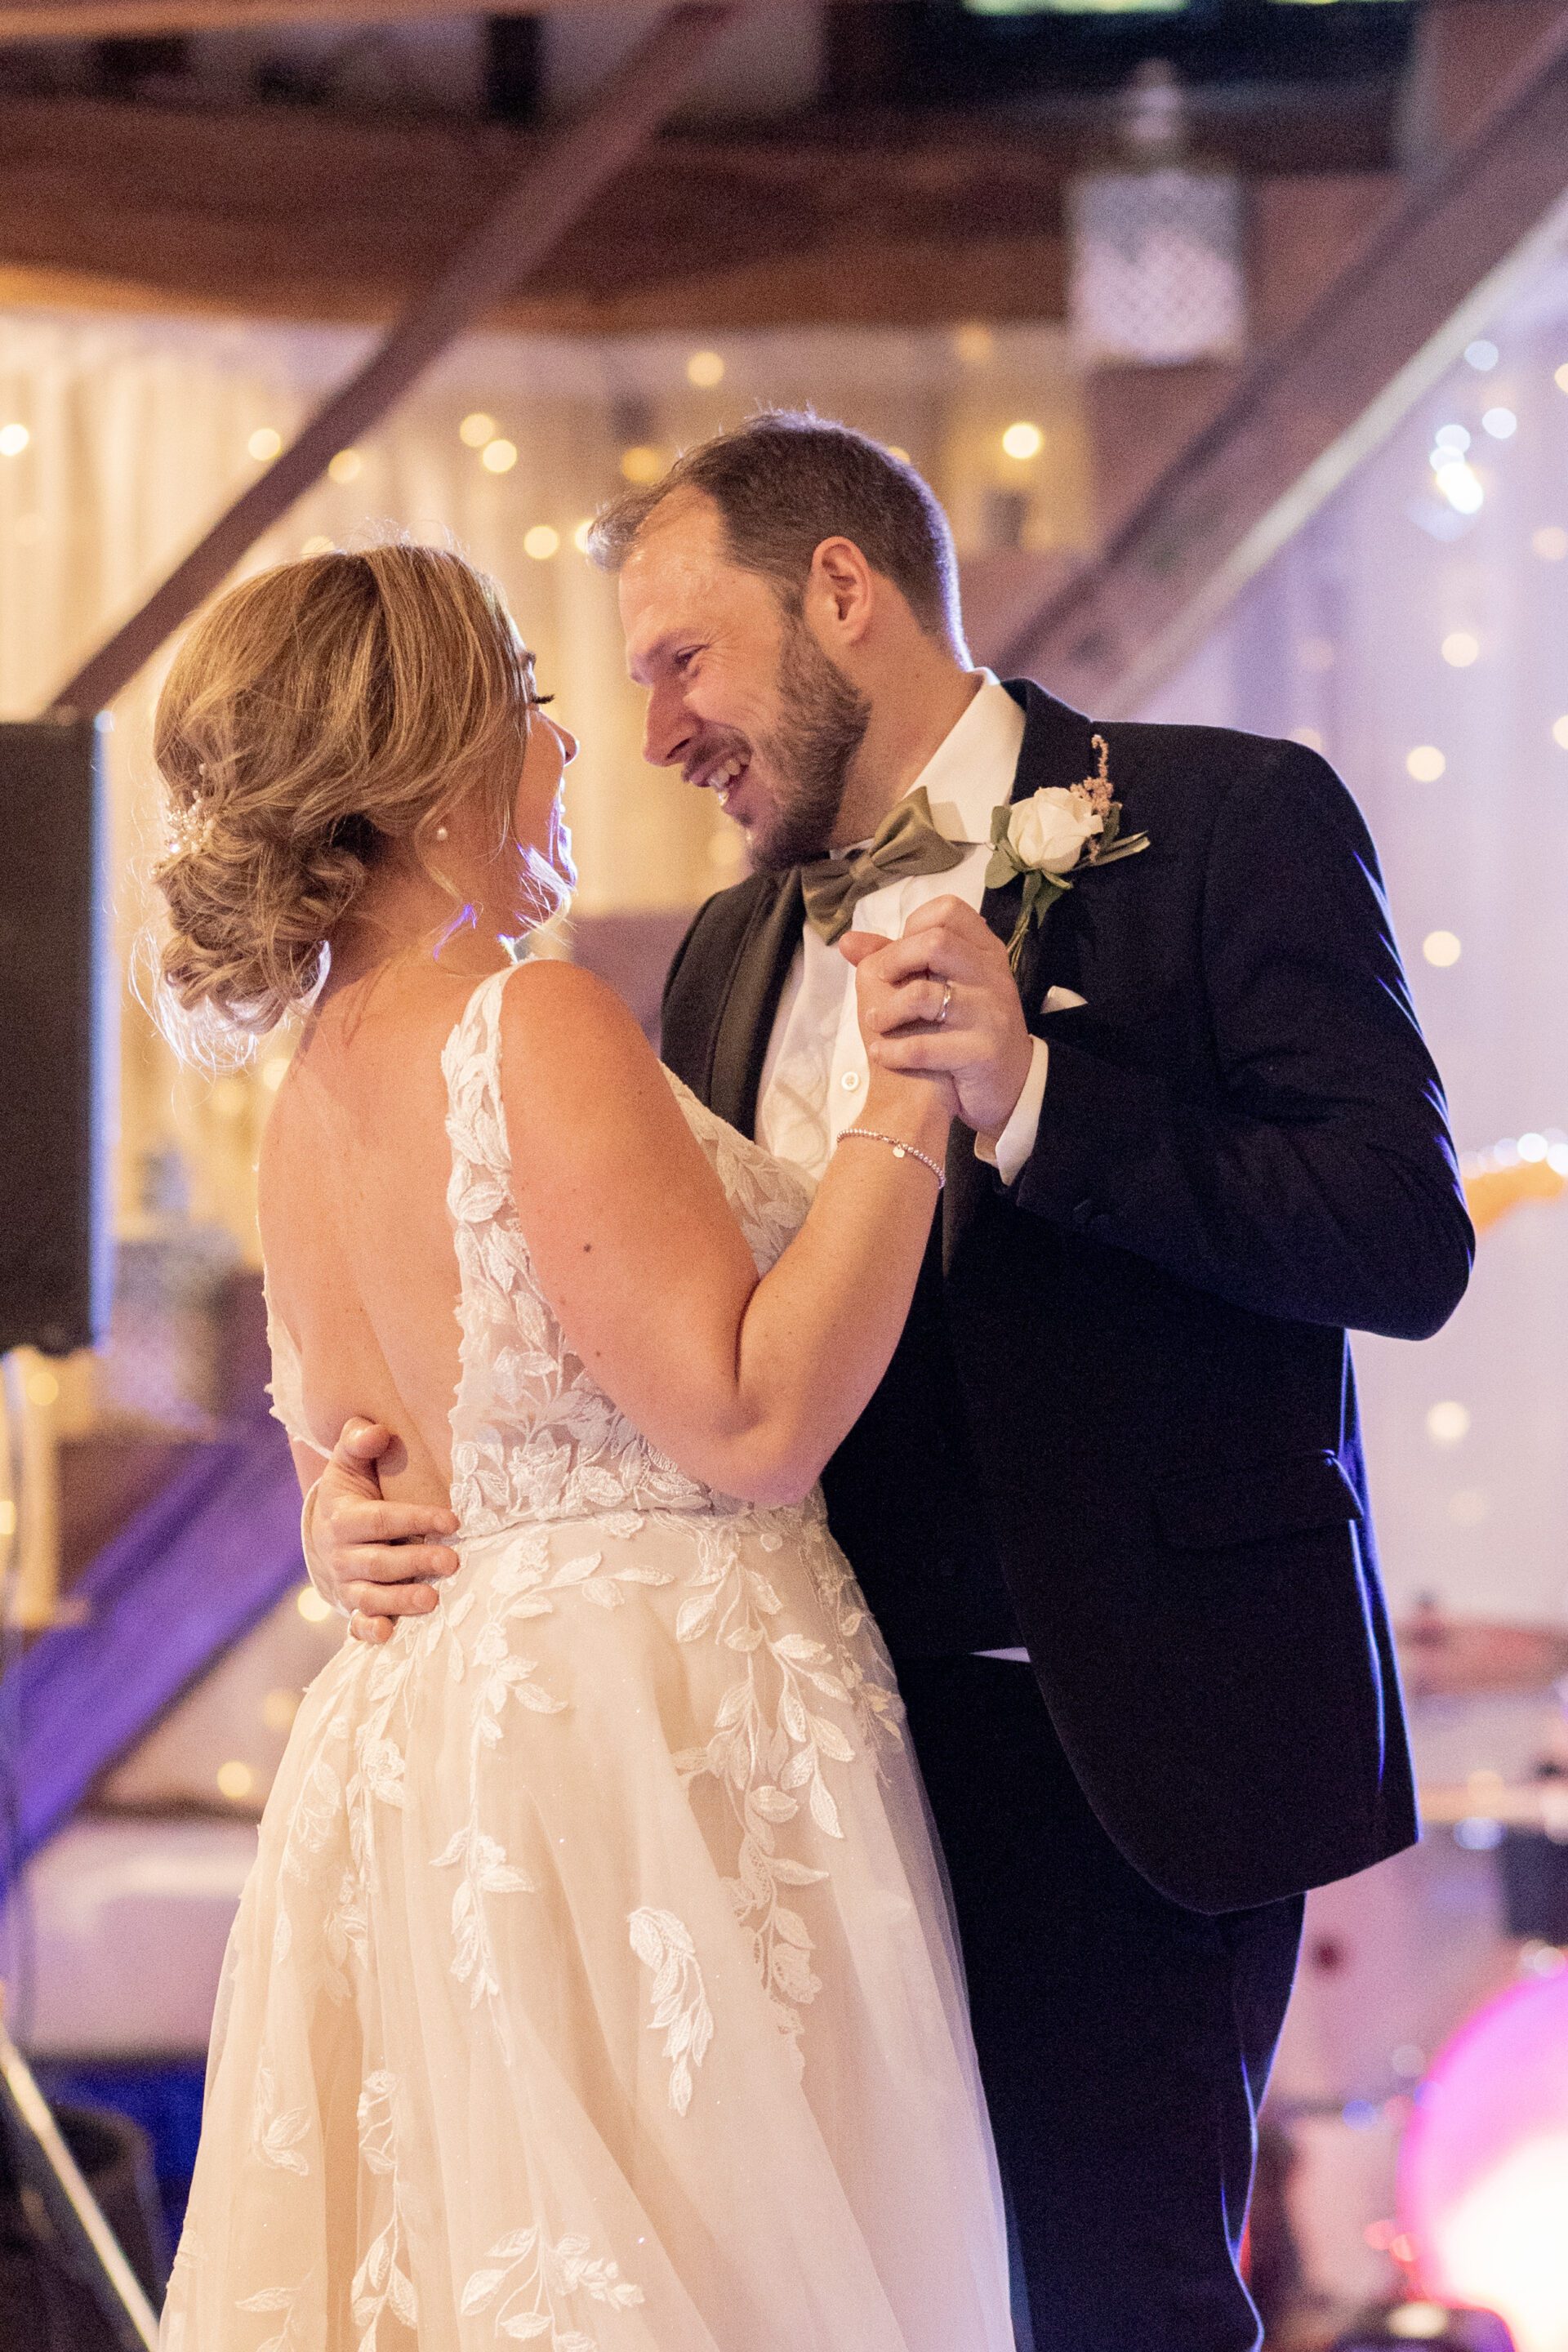 The bride and groom share their first dance at their barn wedding